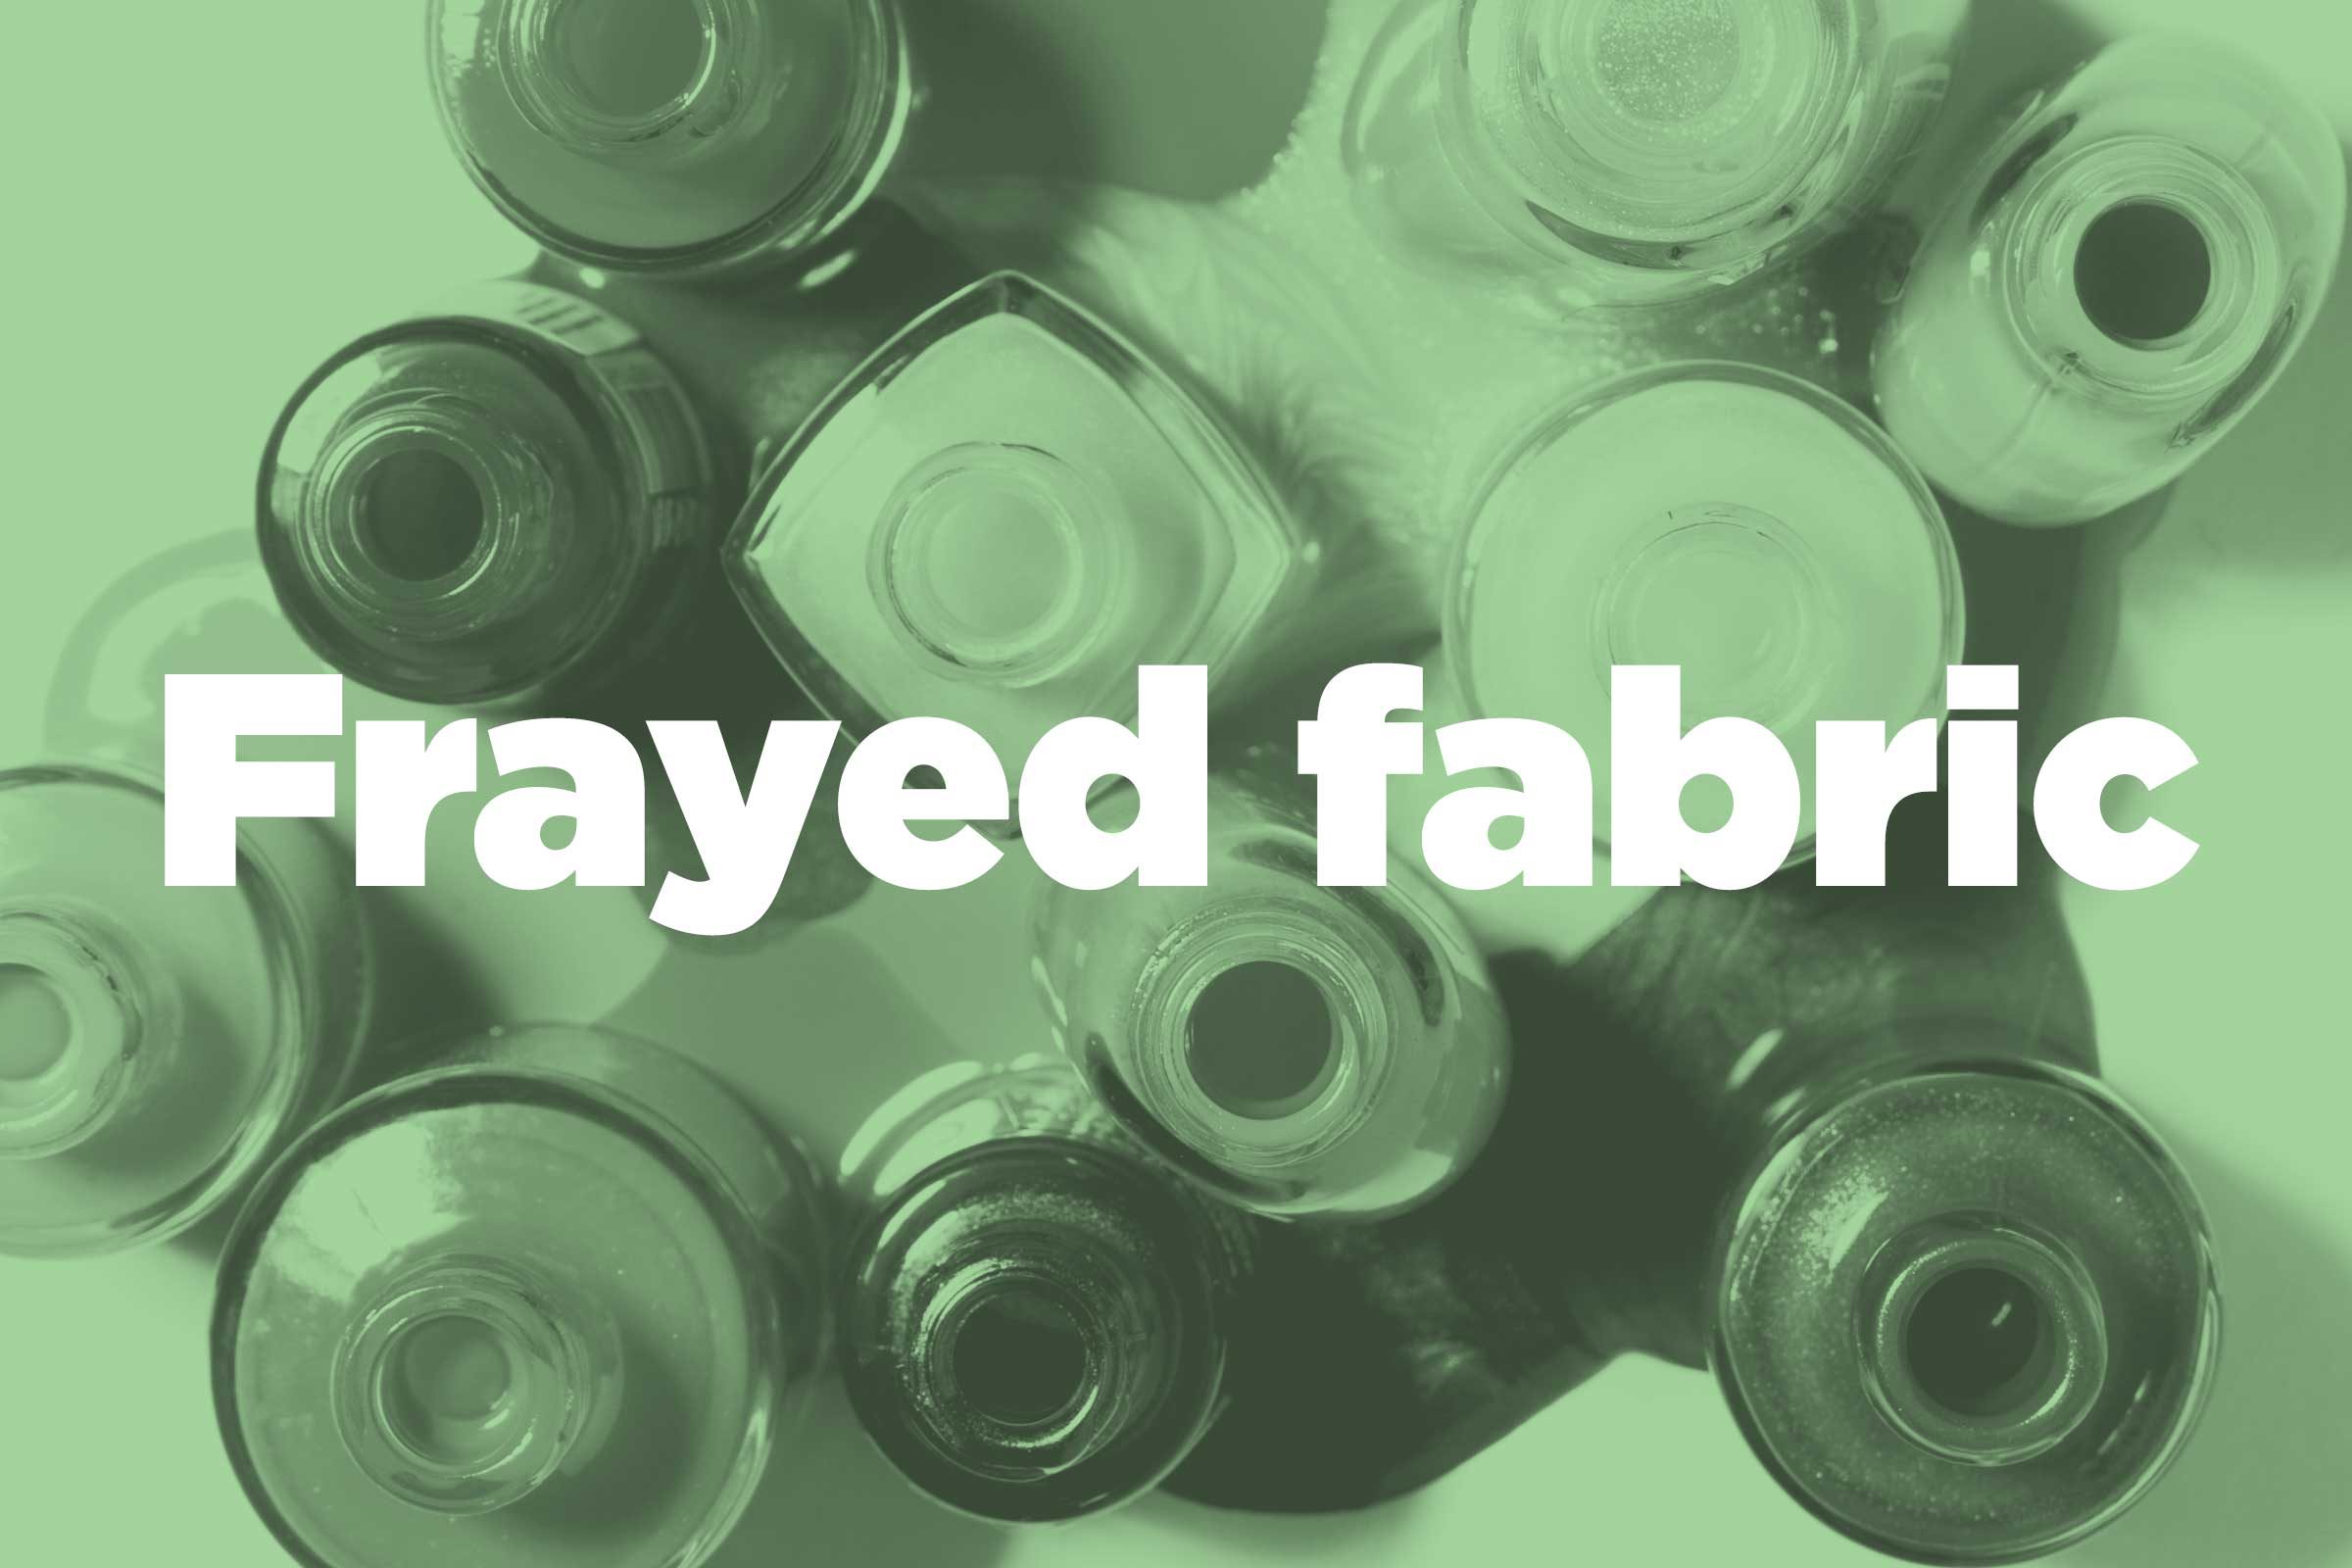 Prevent frayed fabric from getting worse